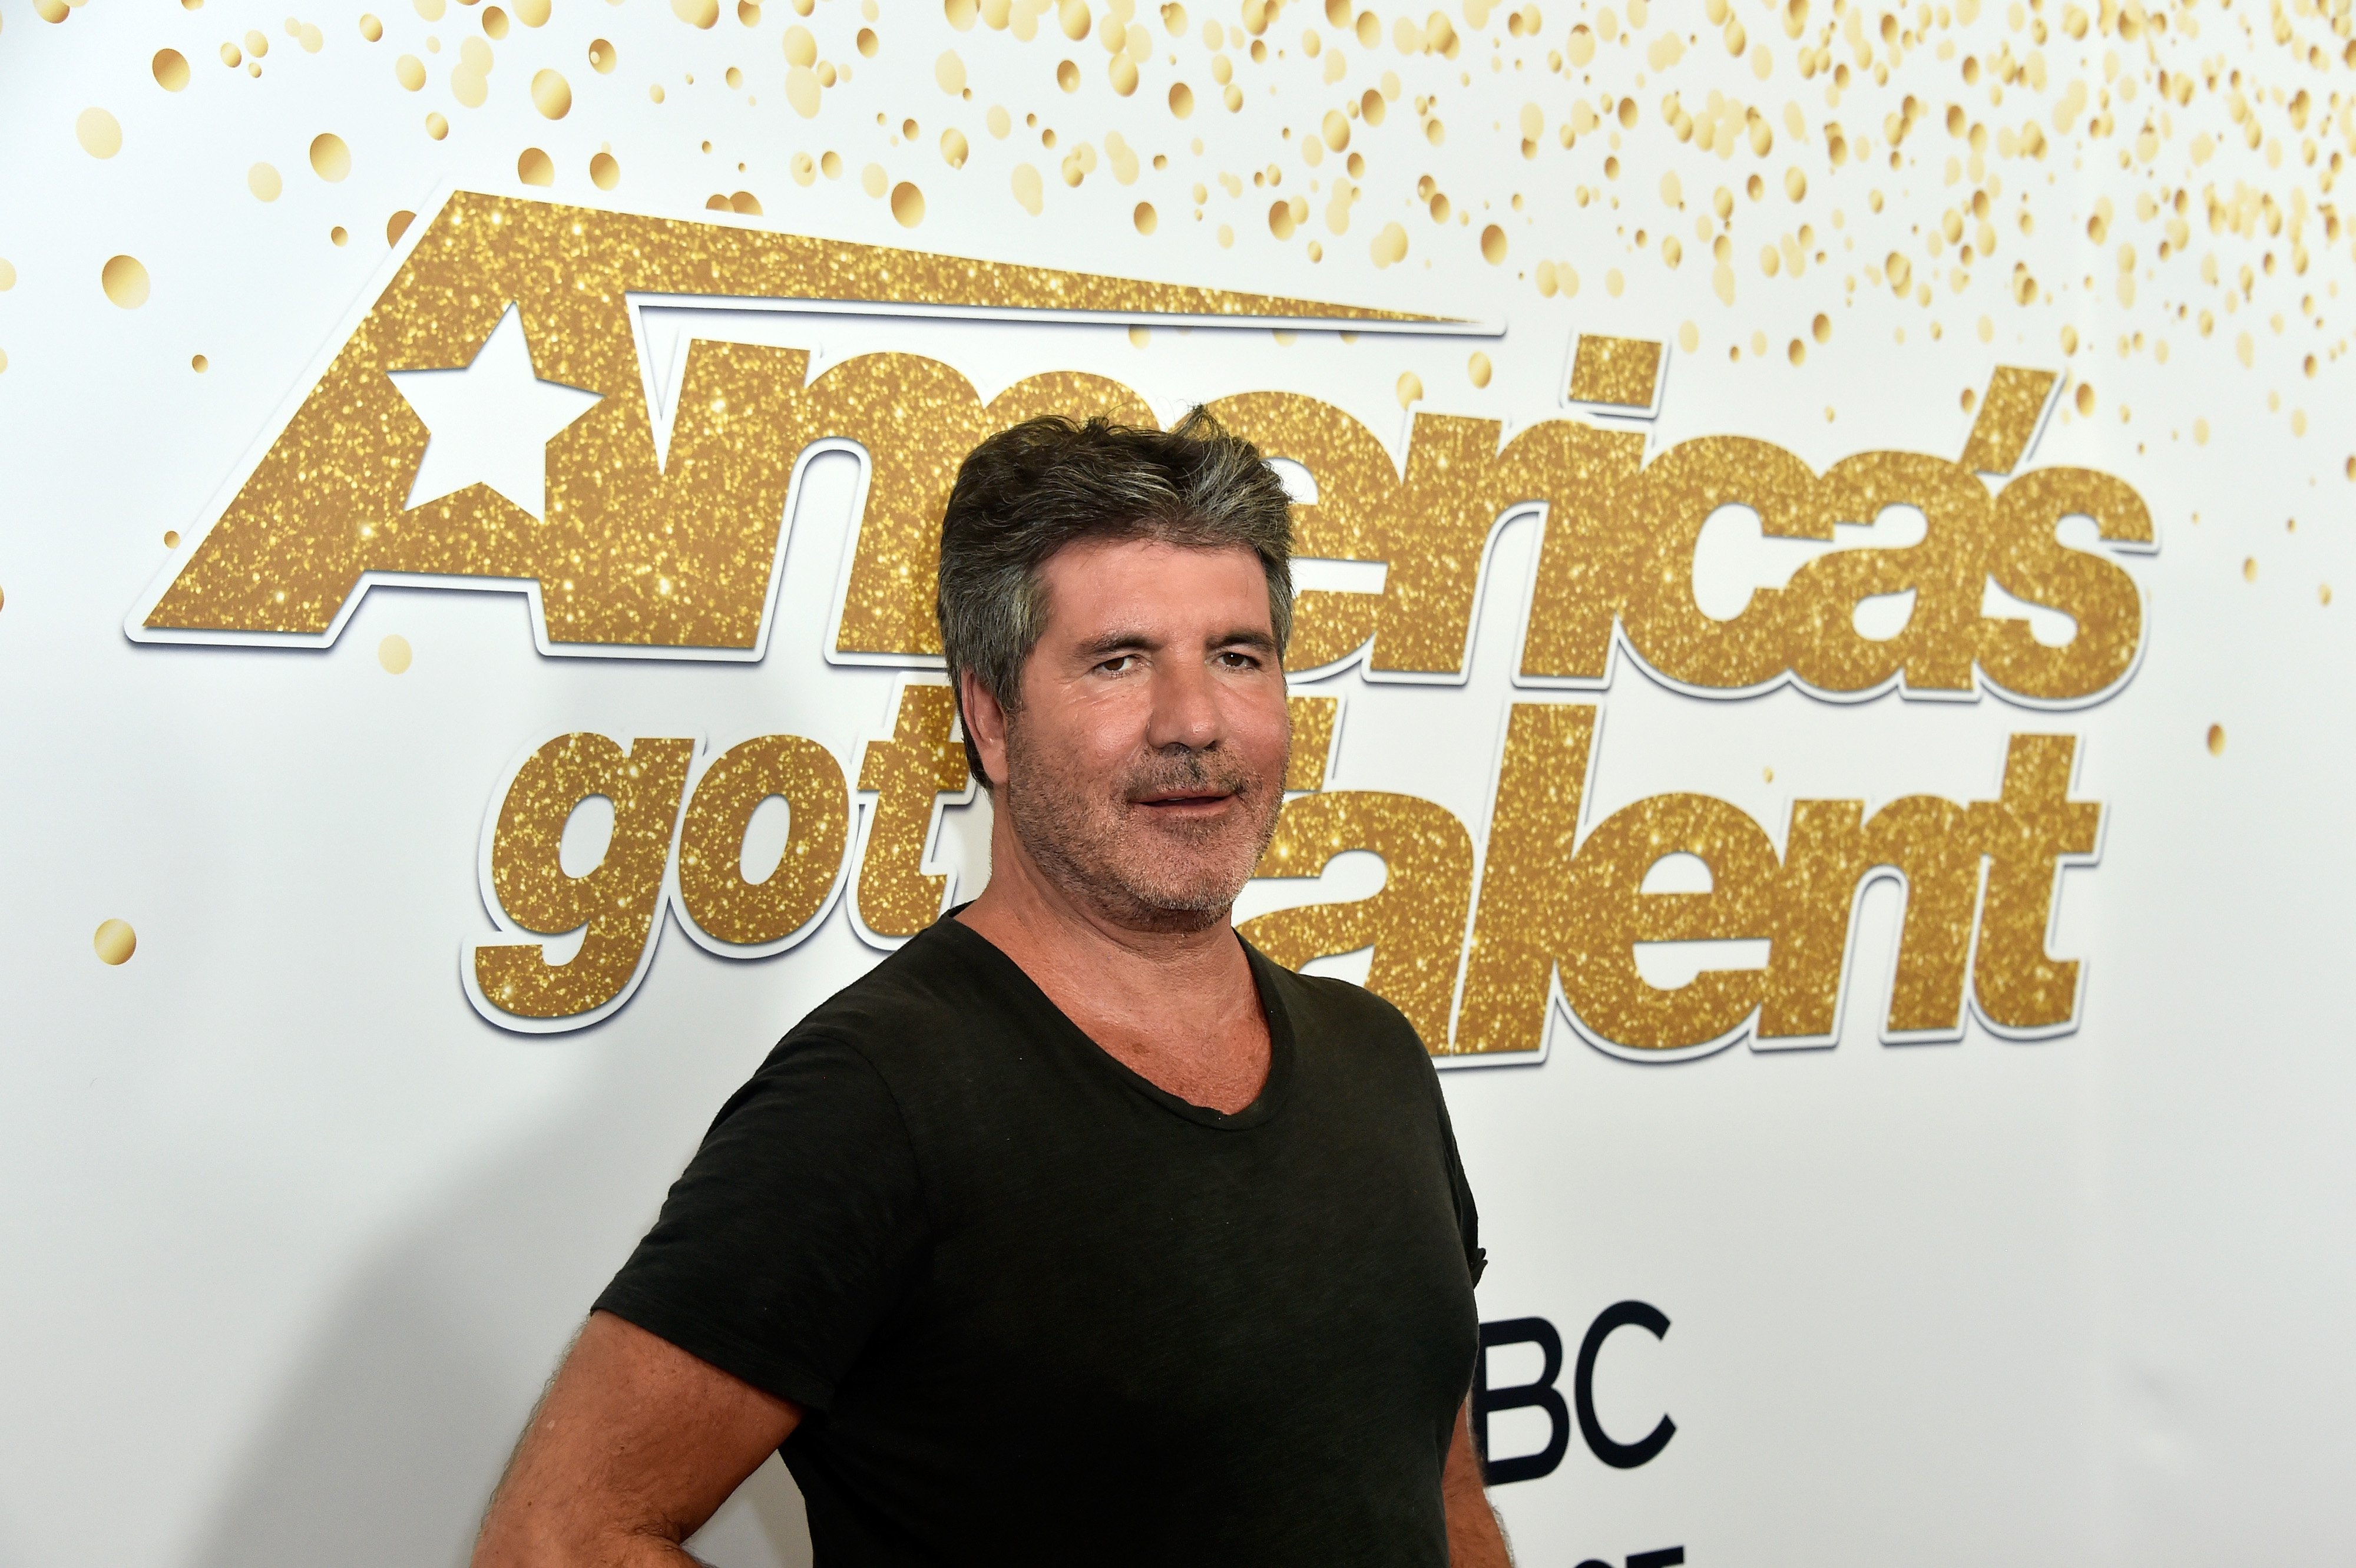 Simon Cowell attends the "America's Got Talent" Season 13 Live Show at Dolby Theatre on August 14, 2018 | Photo: GettyImages